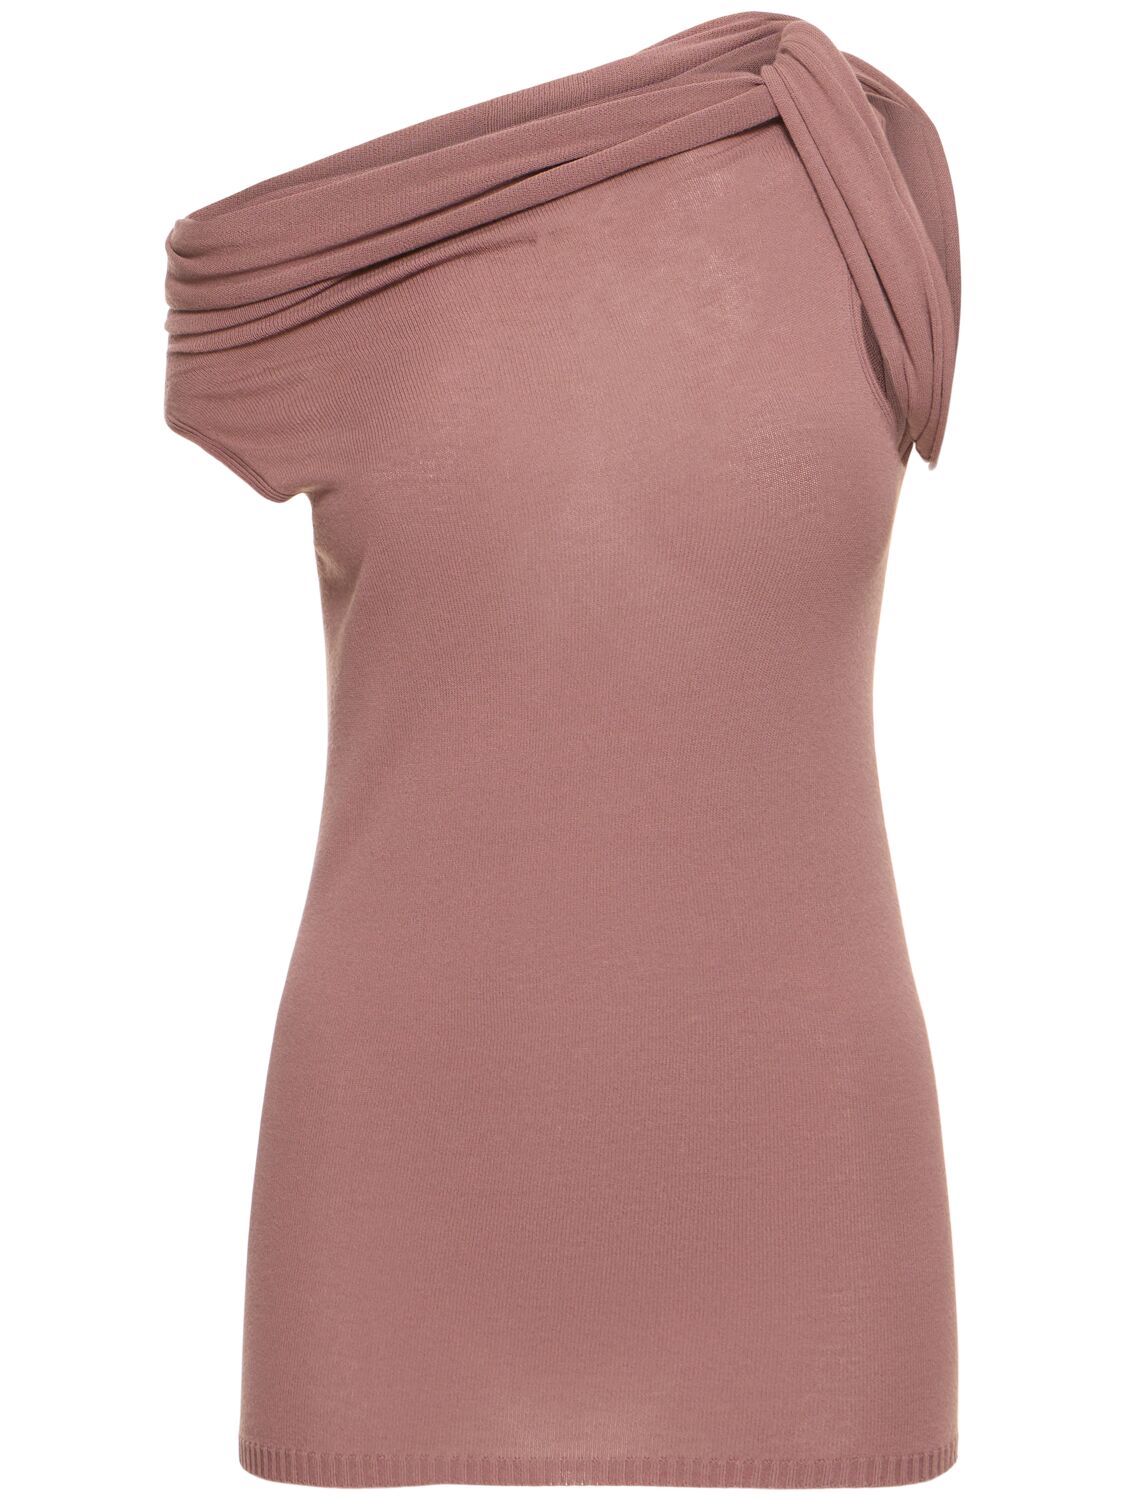 Image of Twisted Jersey Sleeveless Top